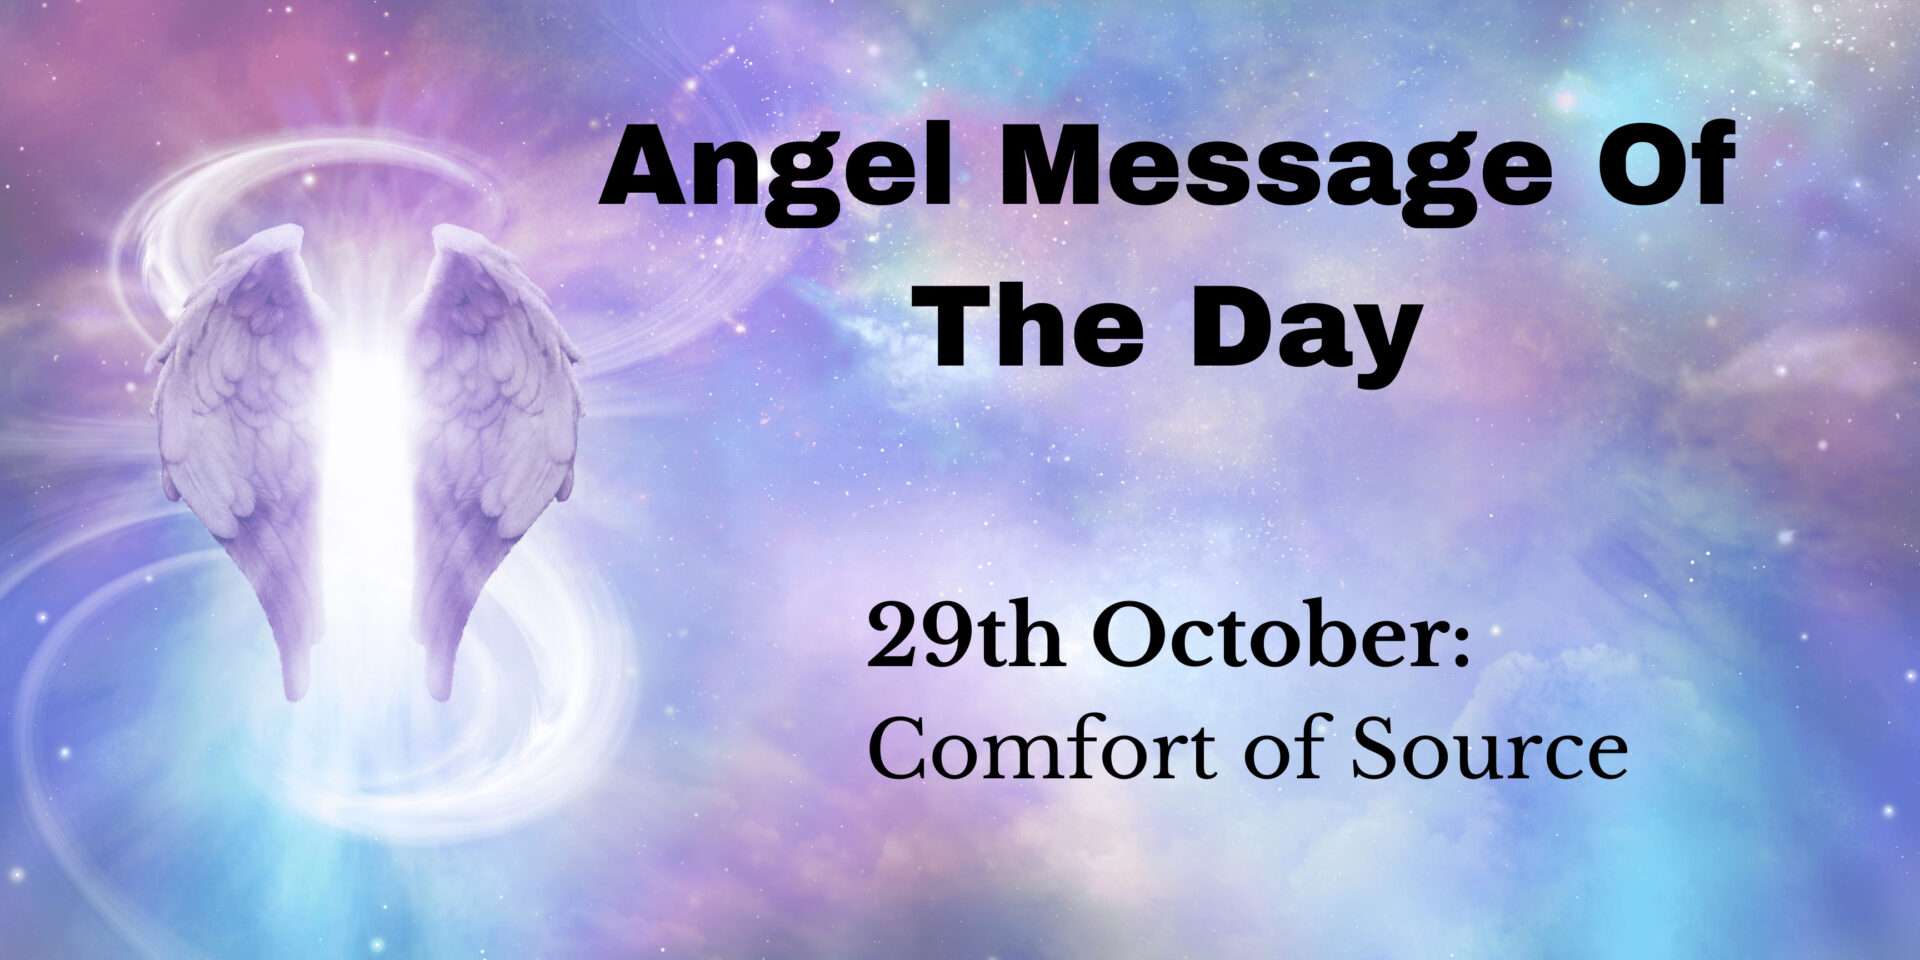 angel message of the day : comfort of source